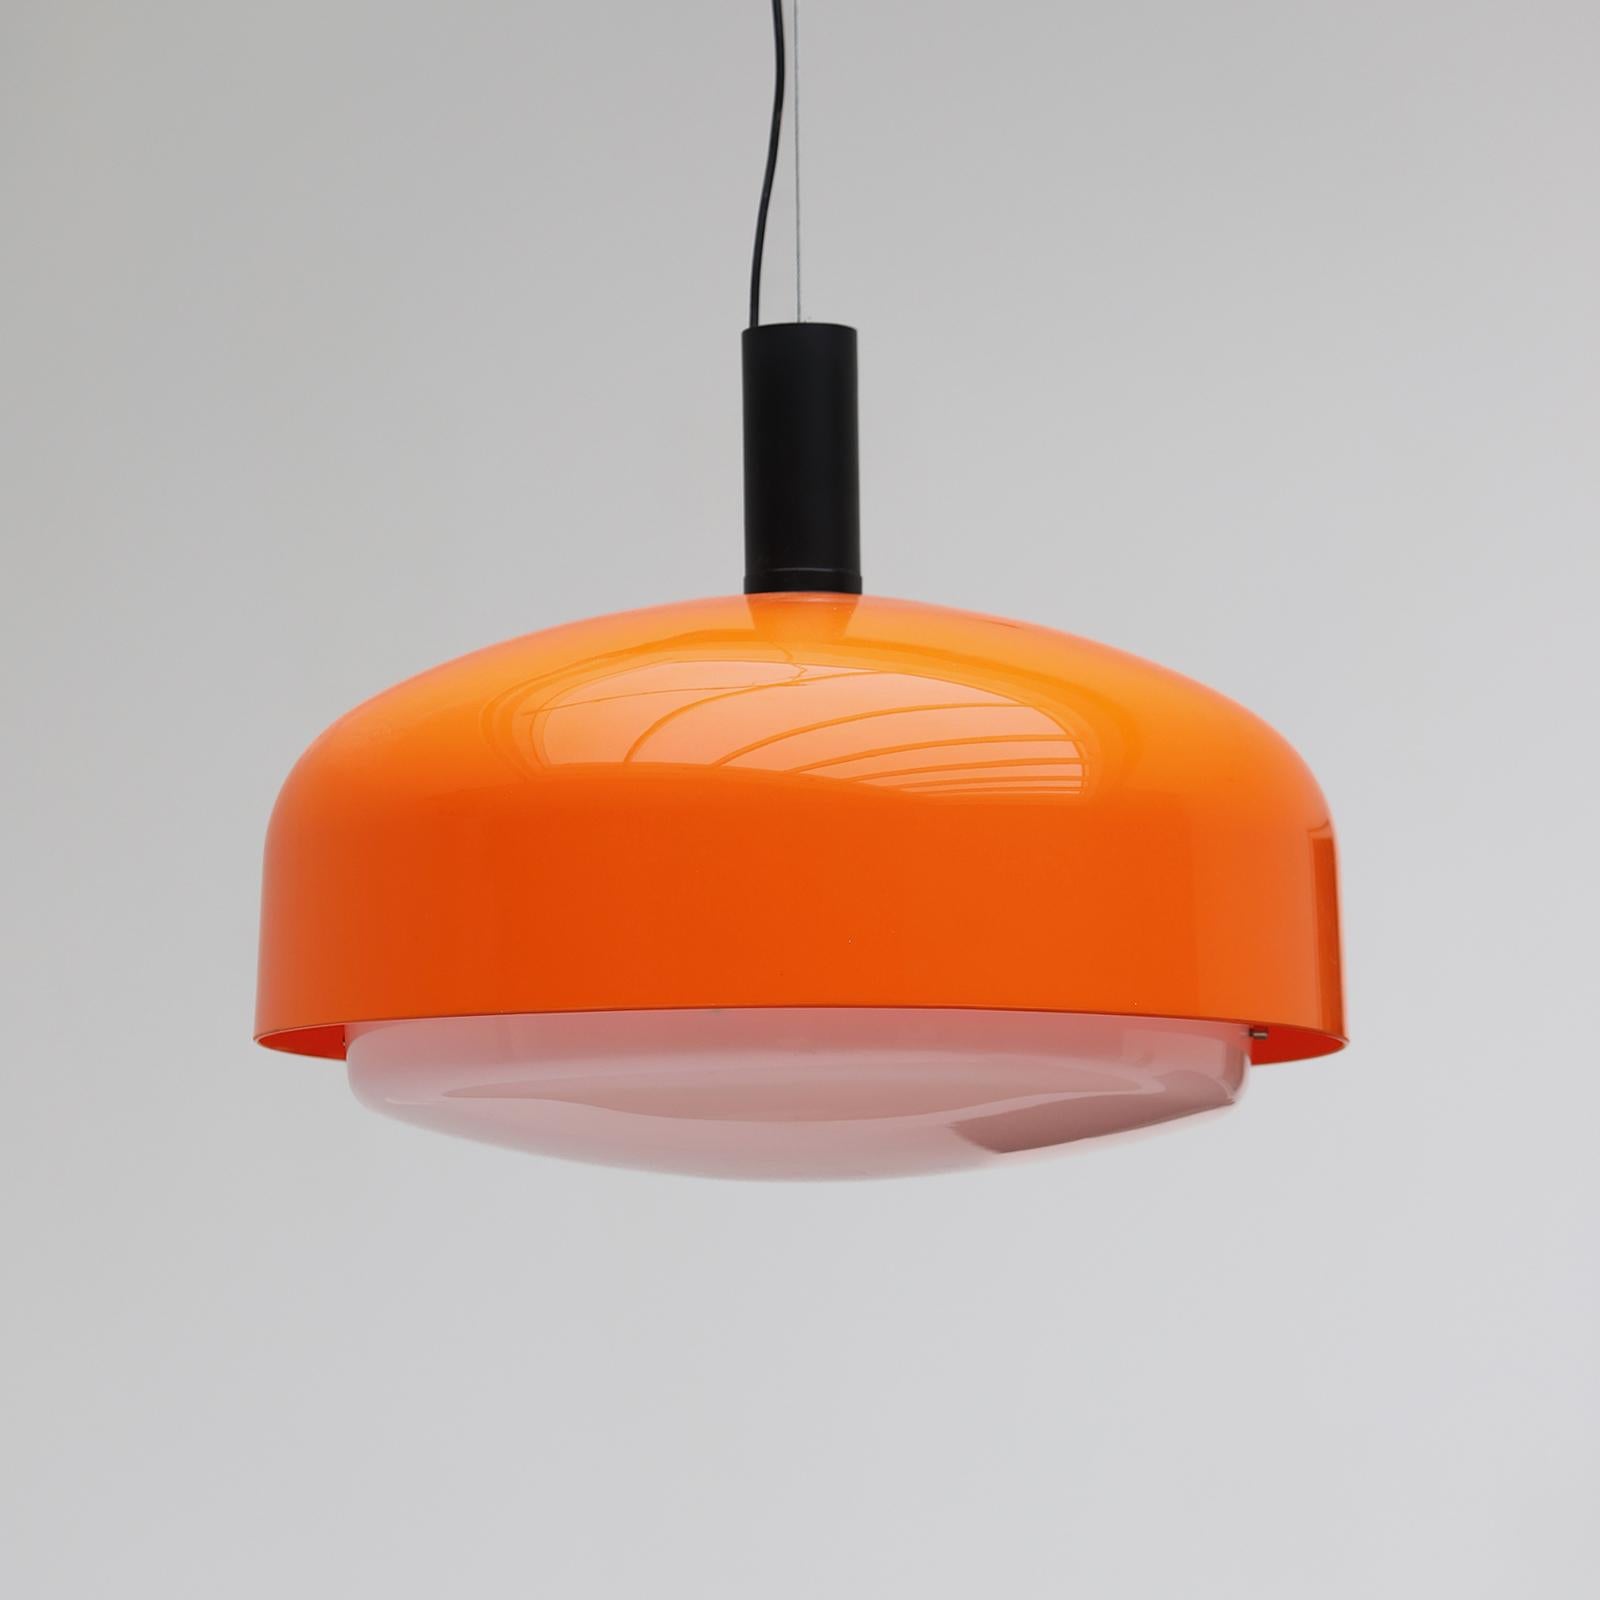 Modern Large KD62 pending lamp by Eugenio Gentili Tedeschi designed for Kartell in 1965 For Sale